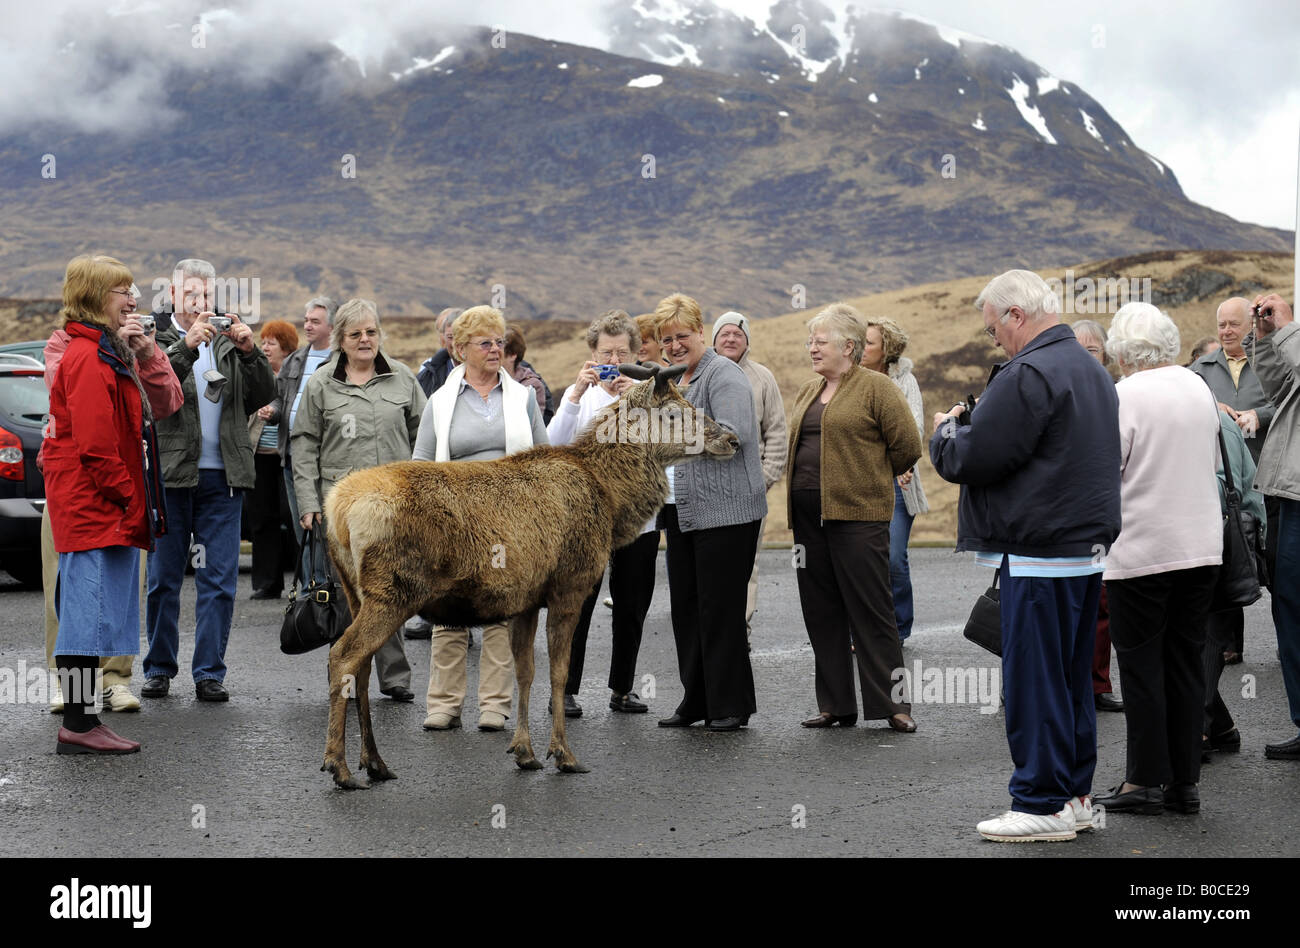 A WILD DEER MINGLES WITH TOURISTS AT A LAYBY IN THE HIGHLANDS OF SCOTLAND NEAR GLENCOE.UK Stock Photo